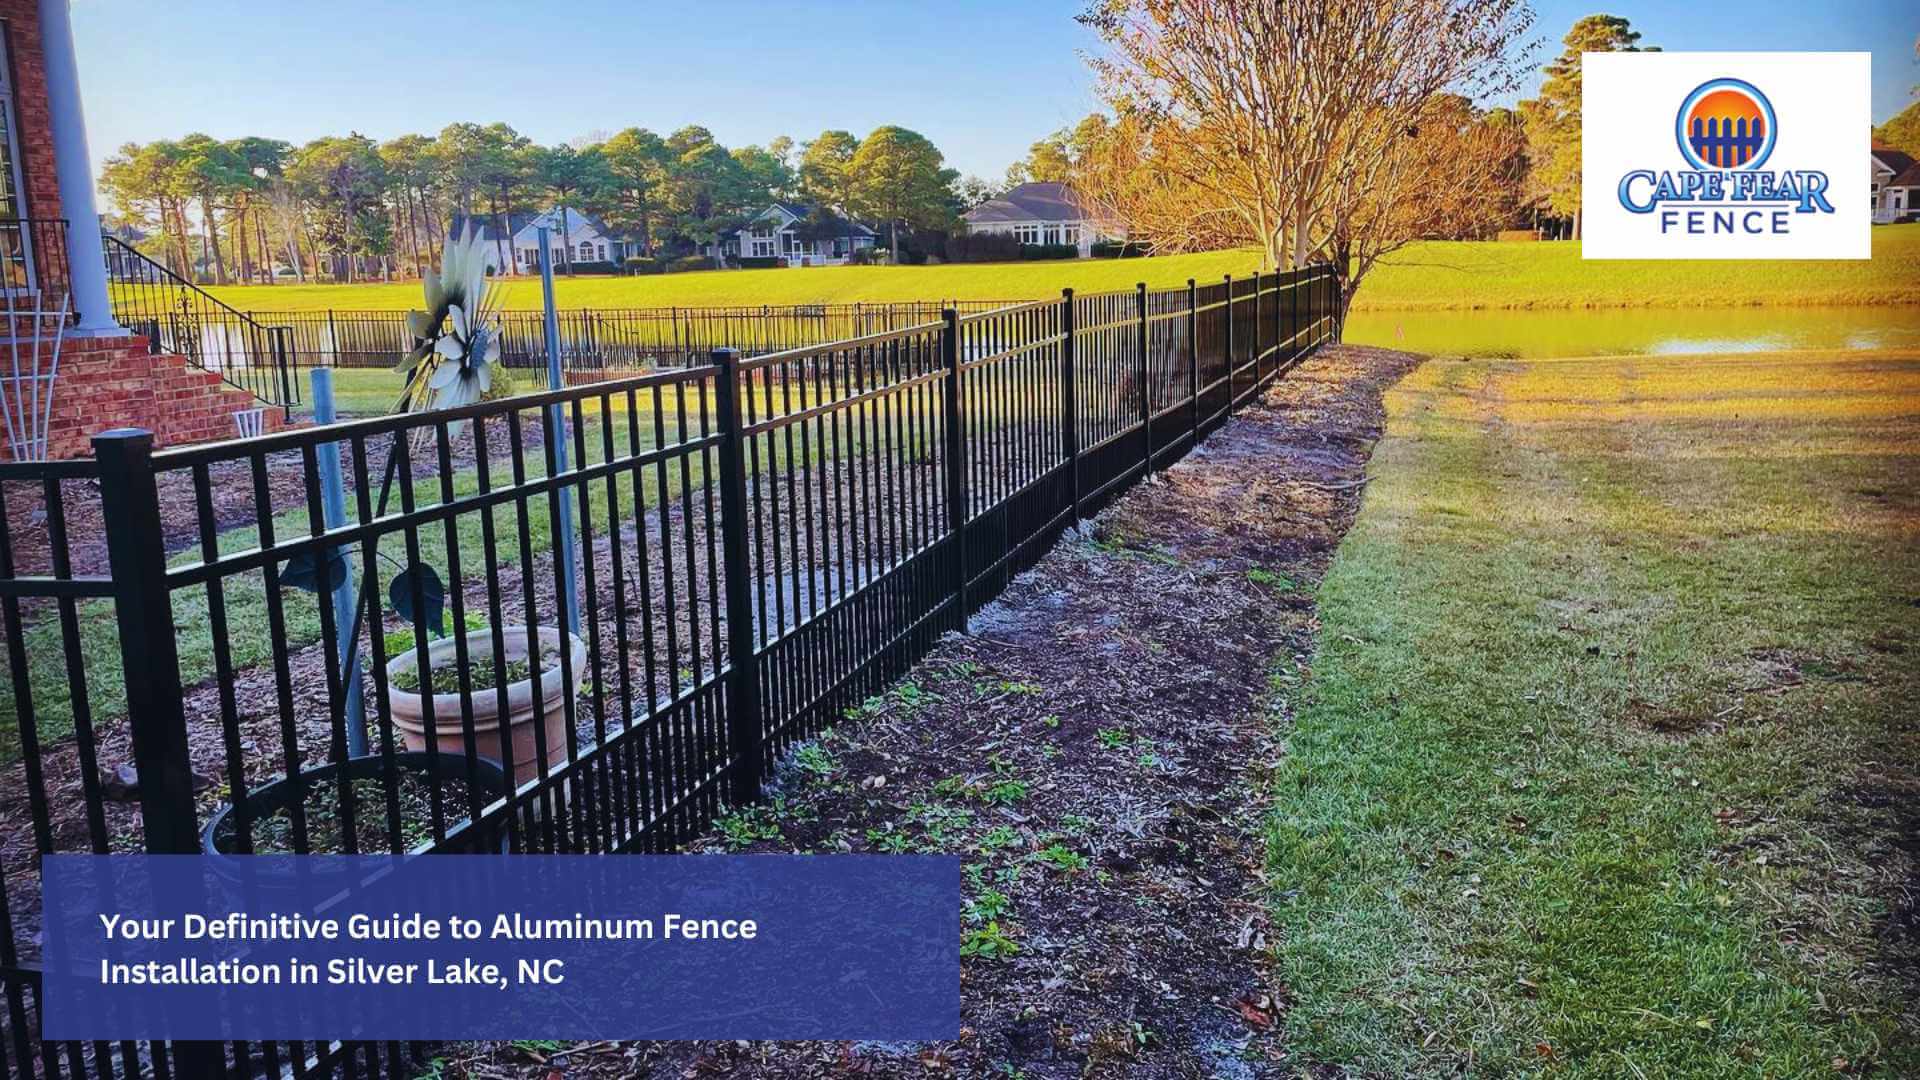 Your Definitive Guide to Aluminum Fence Installation in Silver Lake, NC